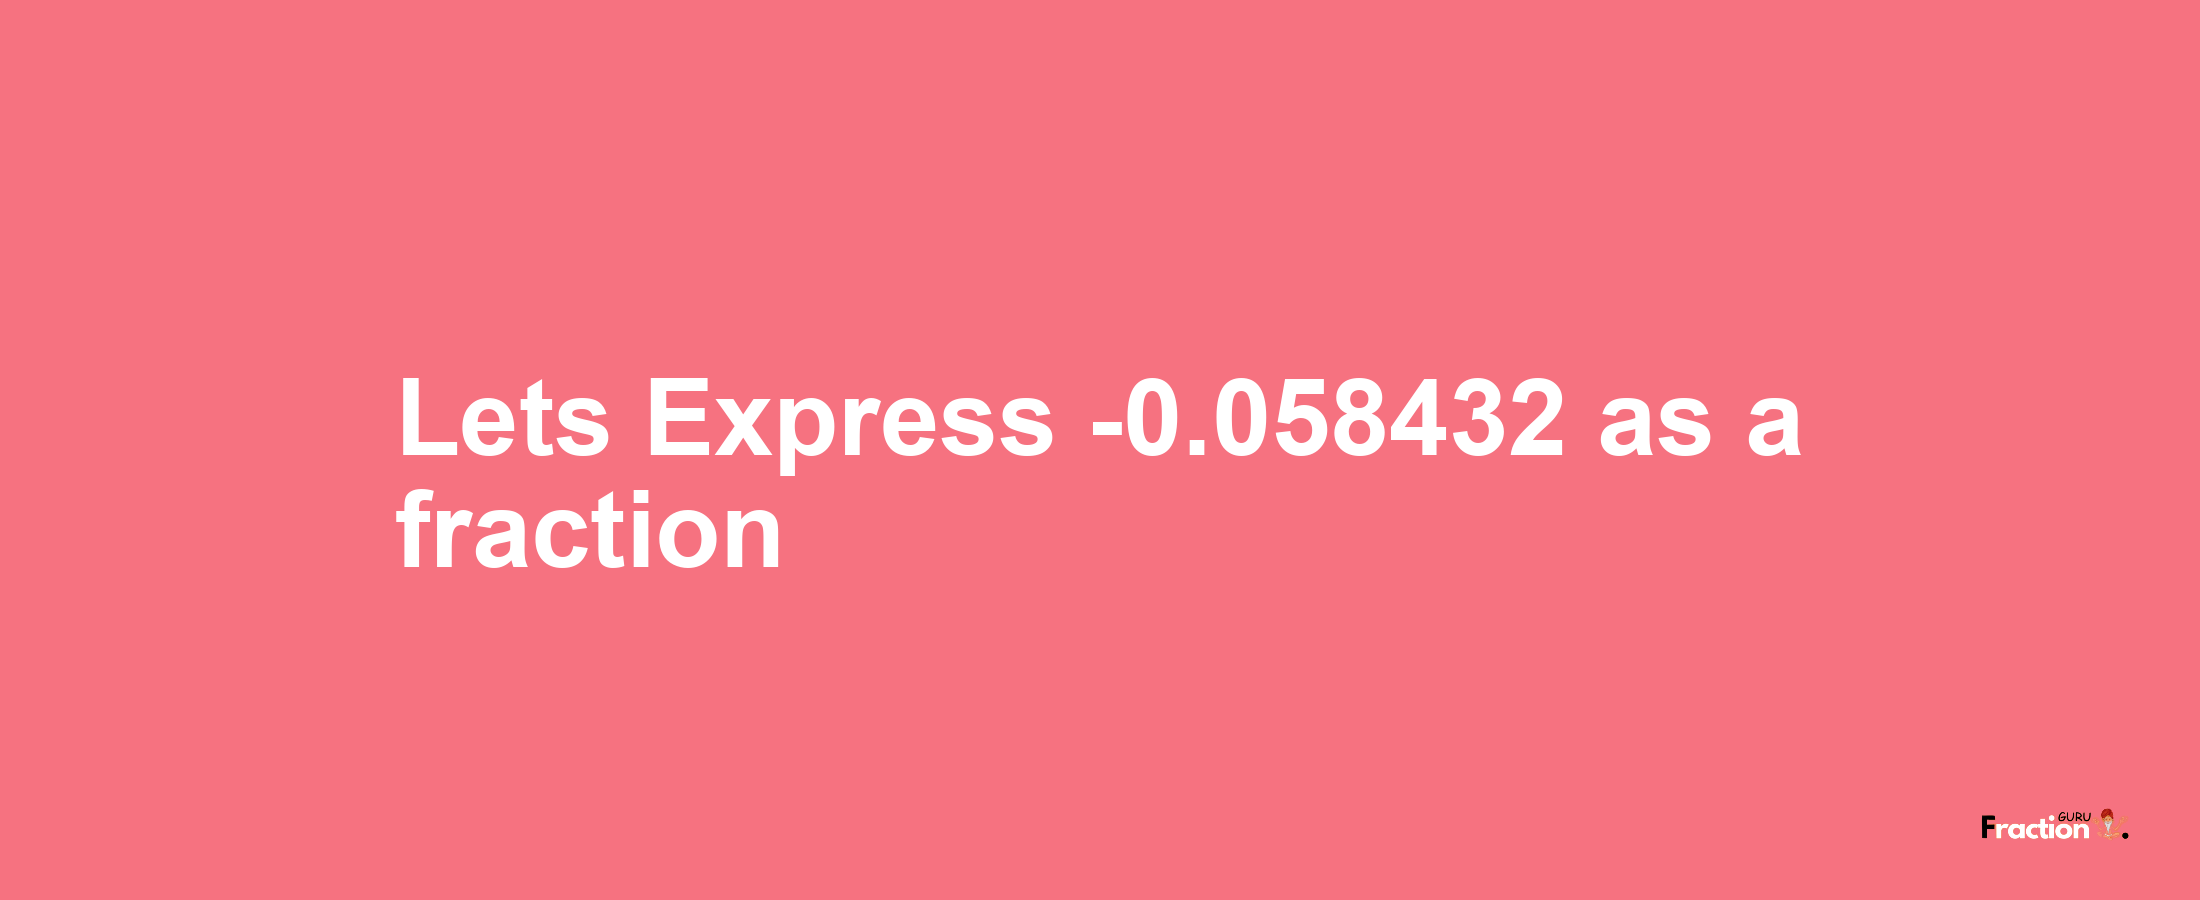 Lets Express -0.058432 as afraction